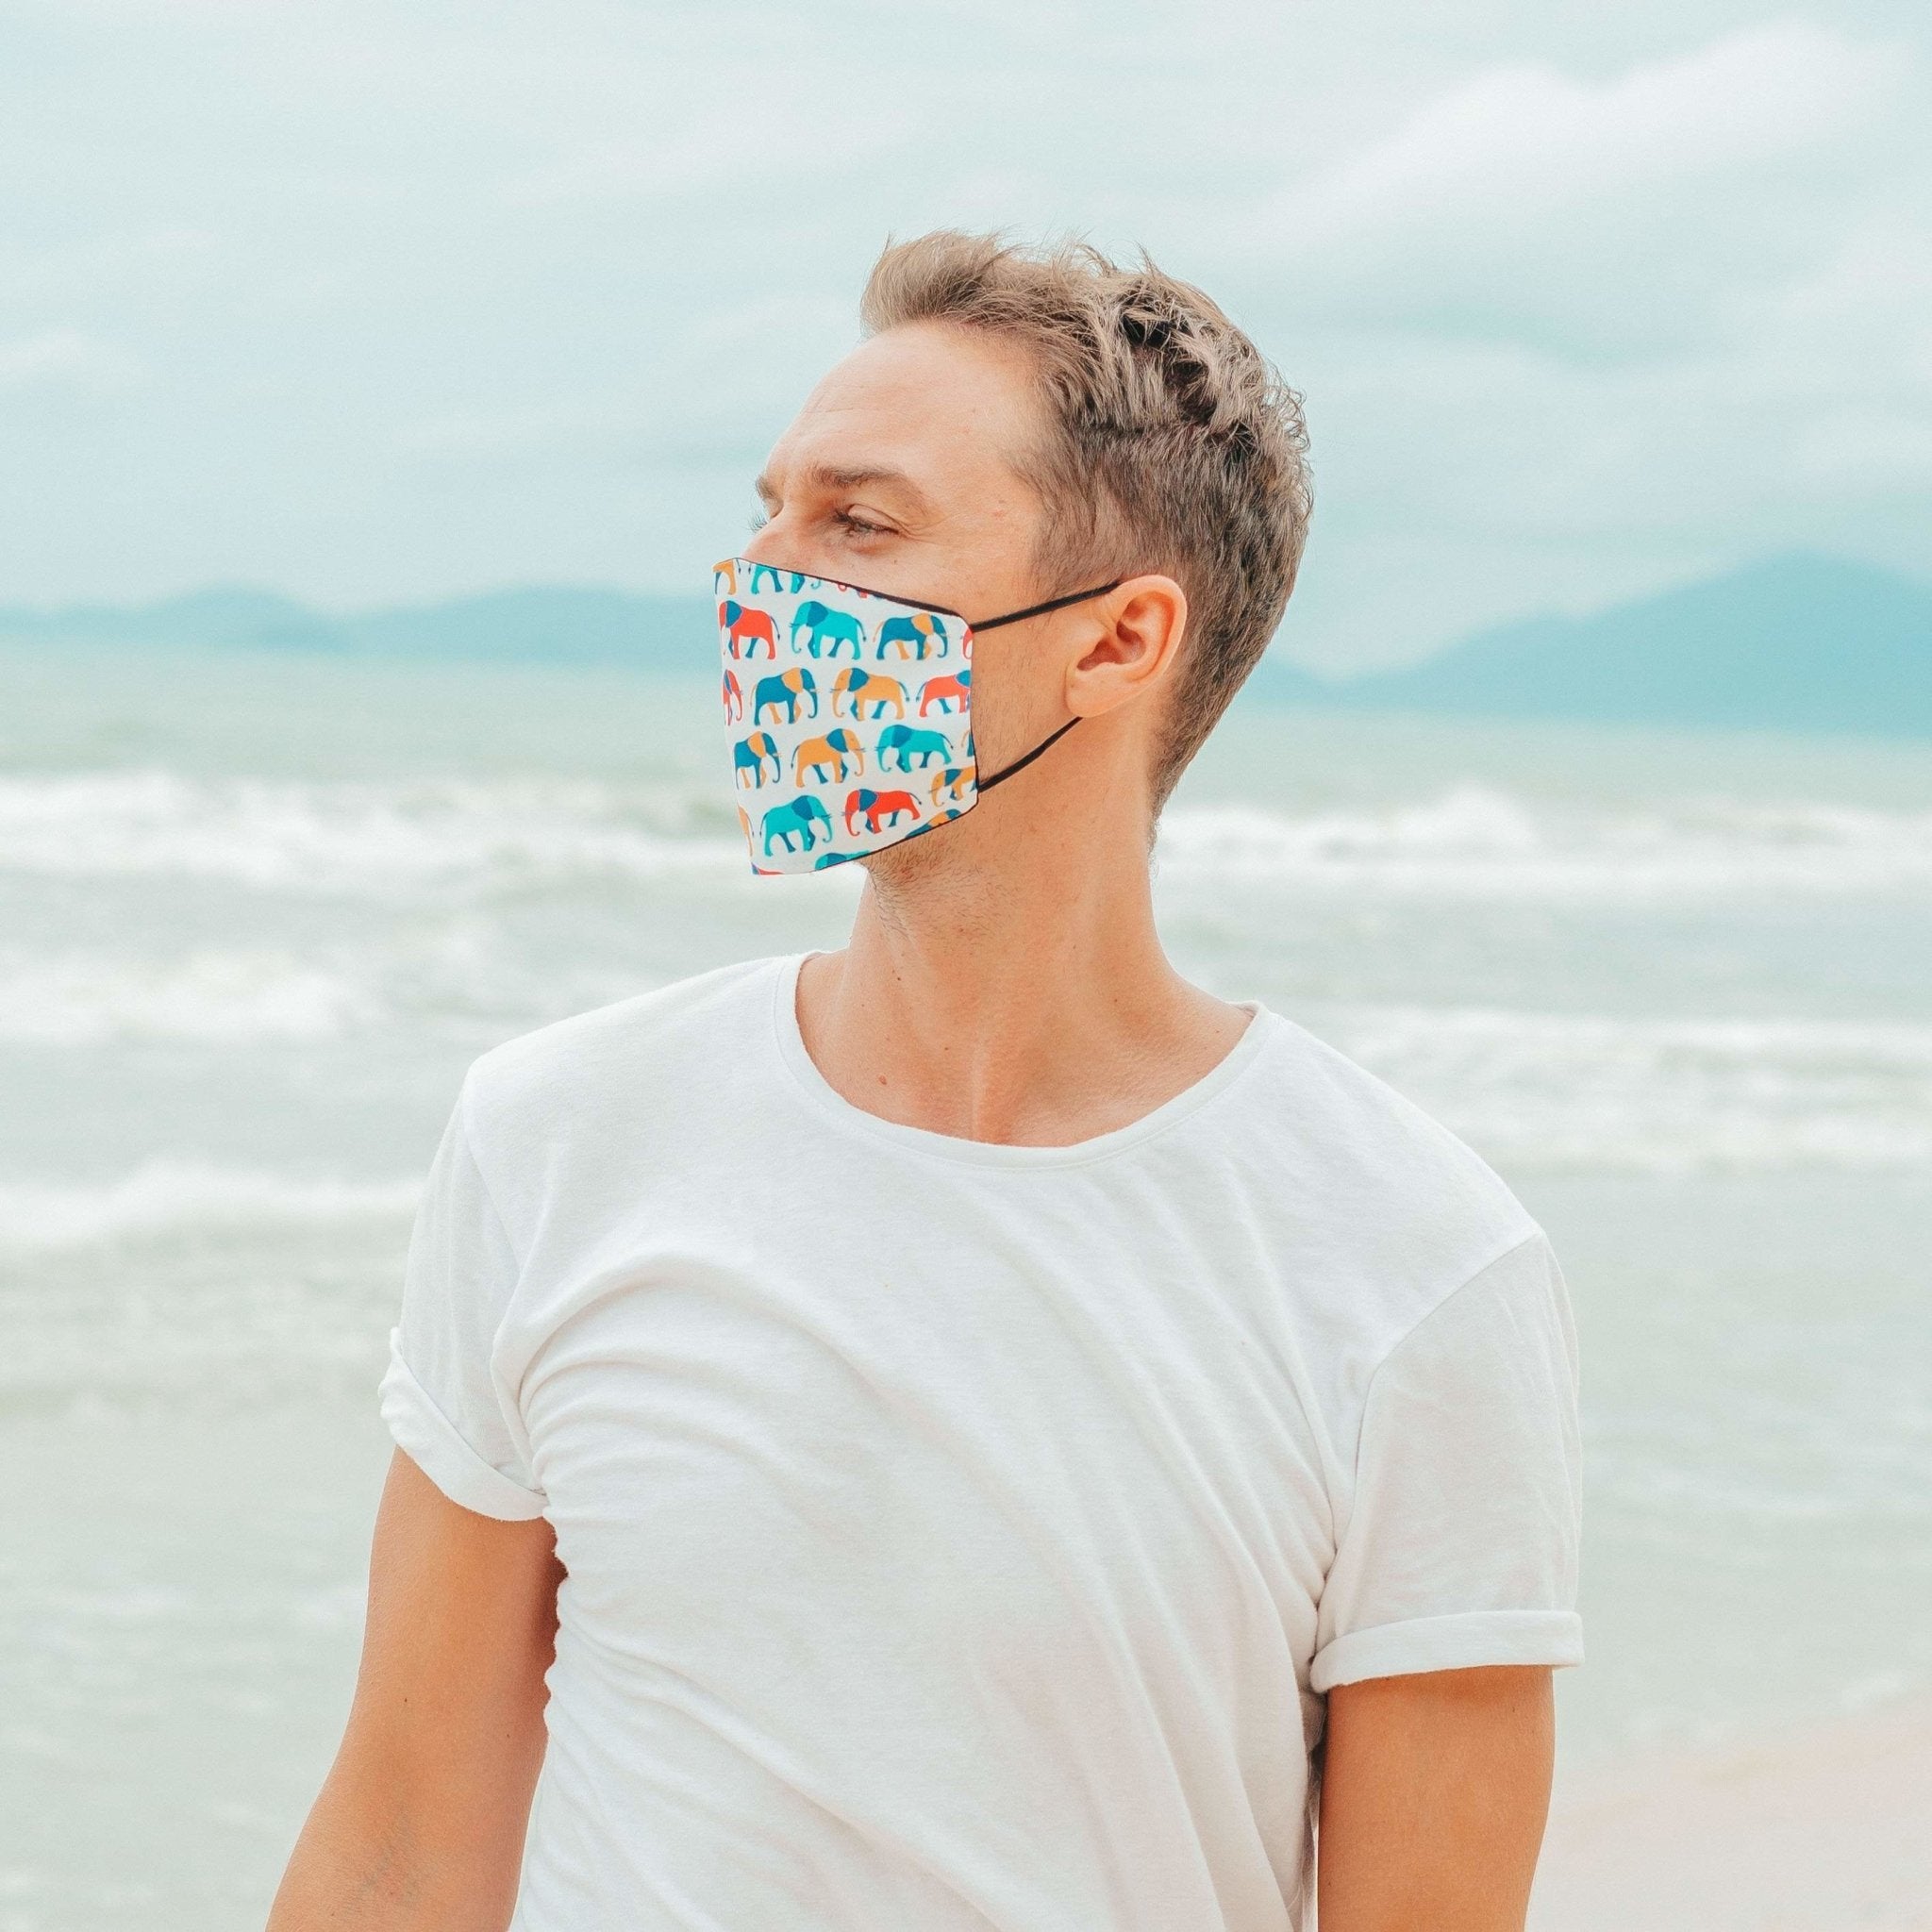 FACE MASK - Multicolor Elepanta Face Masks - Buy Today Elephant Pants Jewelry And Bohemian Clothes Handmade In Thailand Help To Save The Elephants FairTrade And Vegan